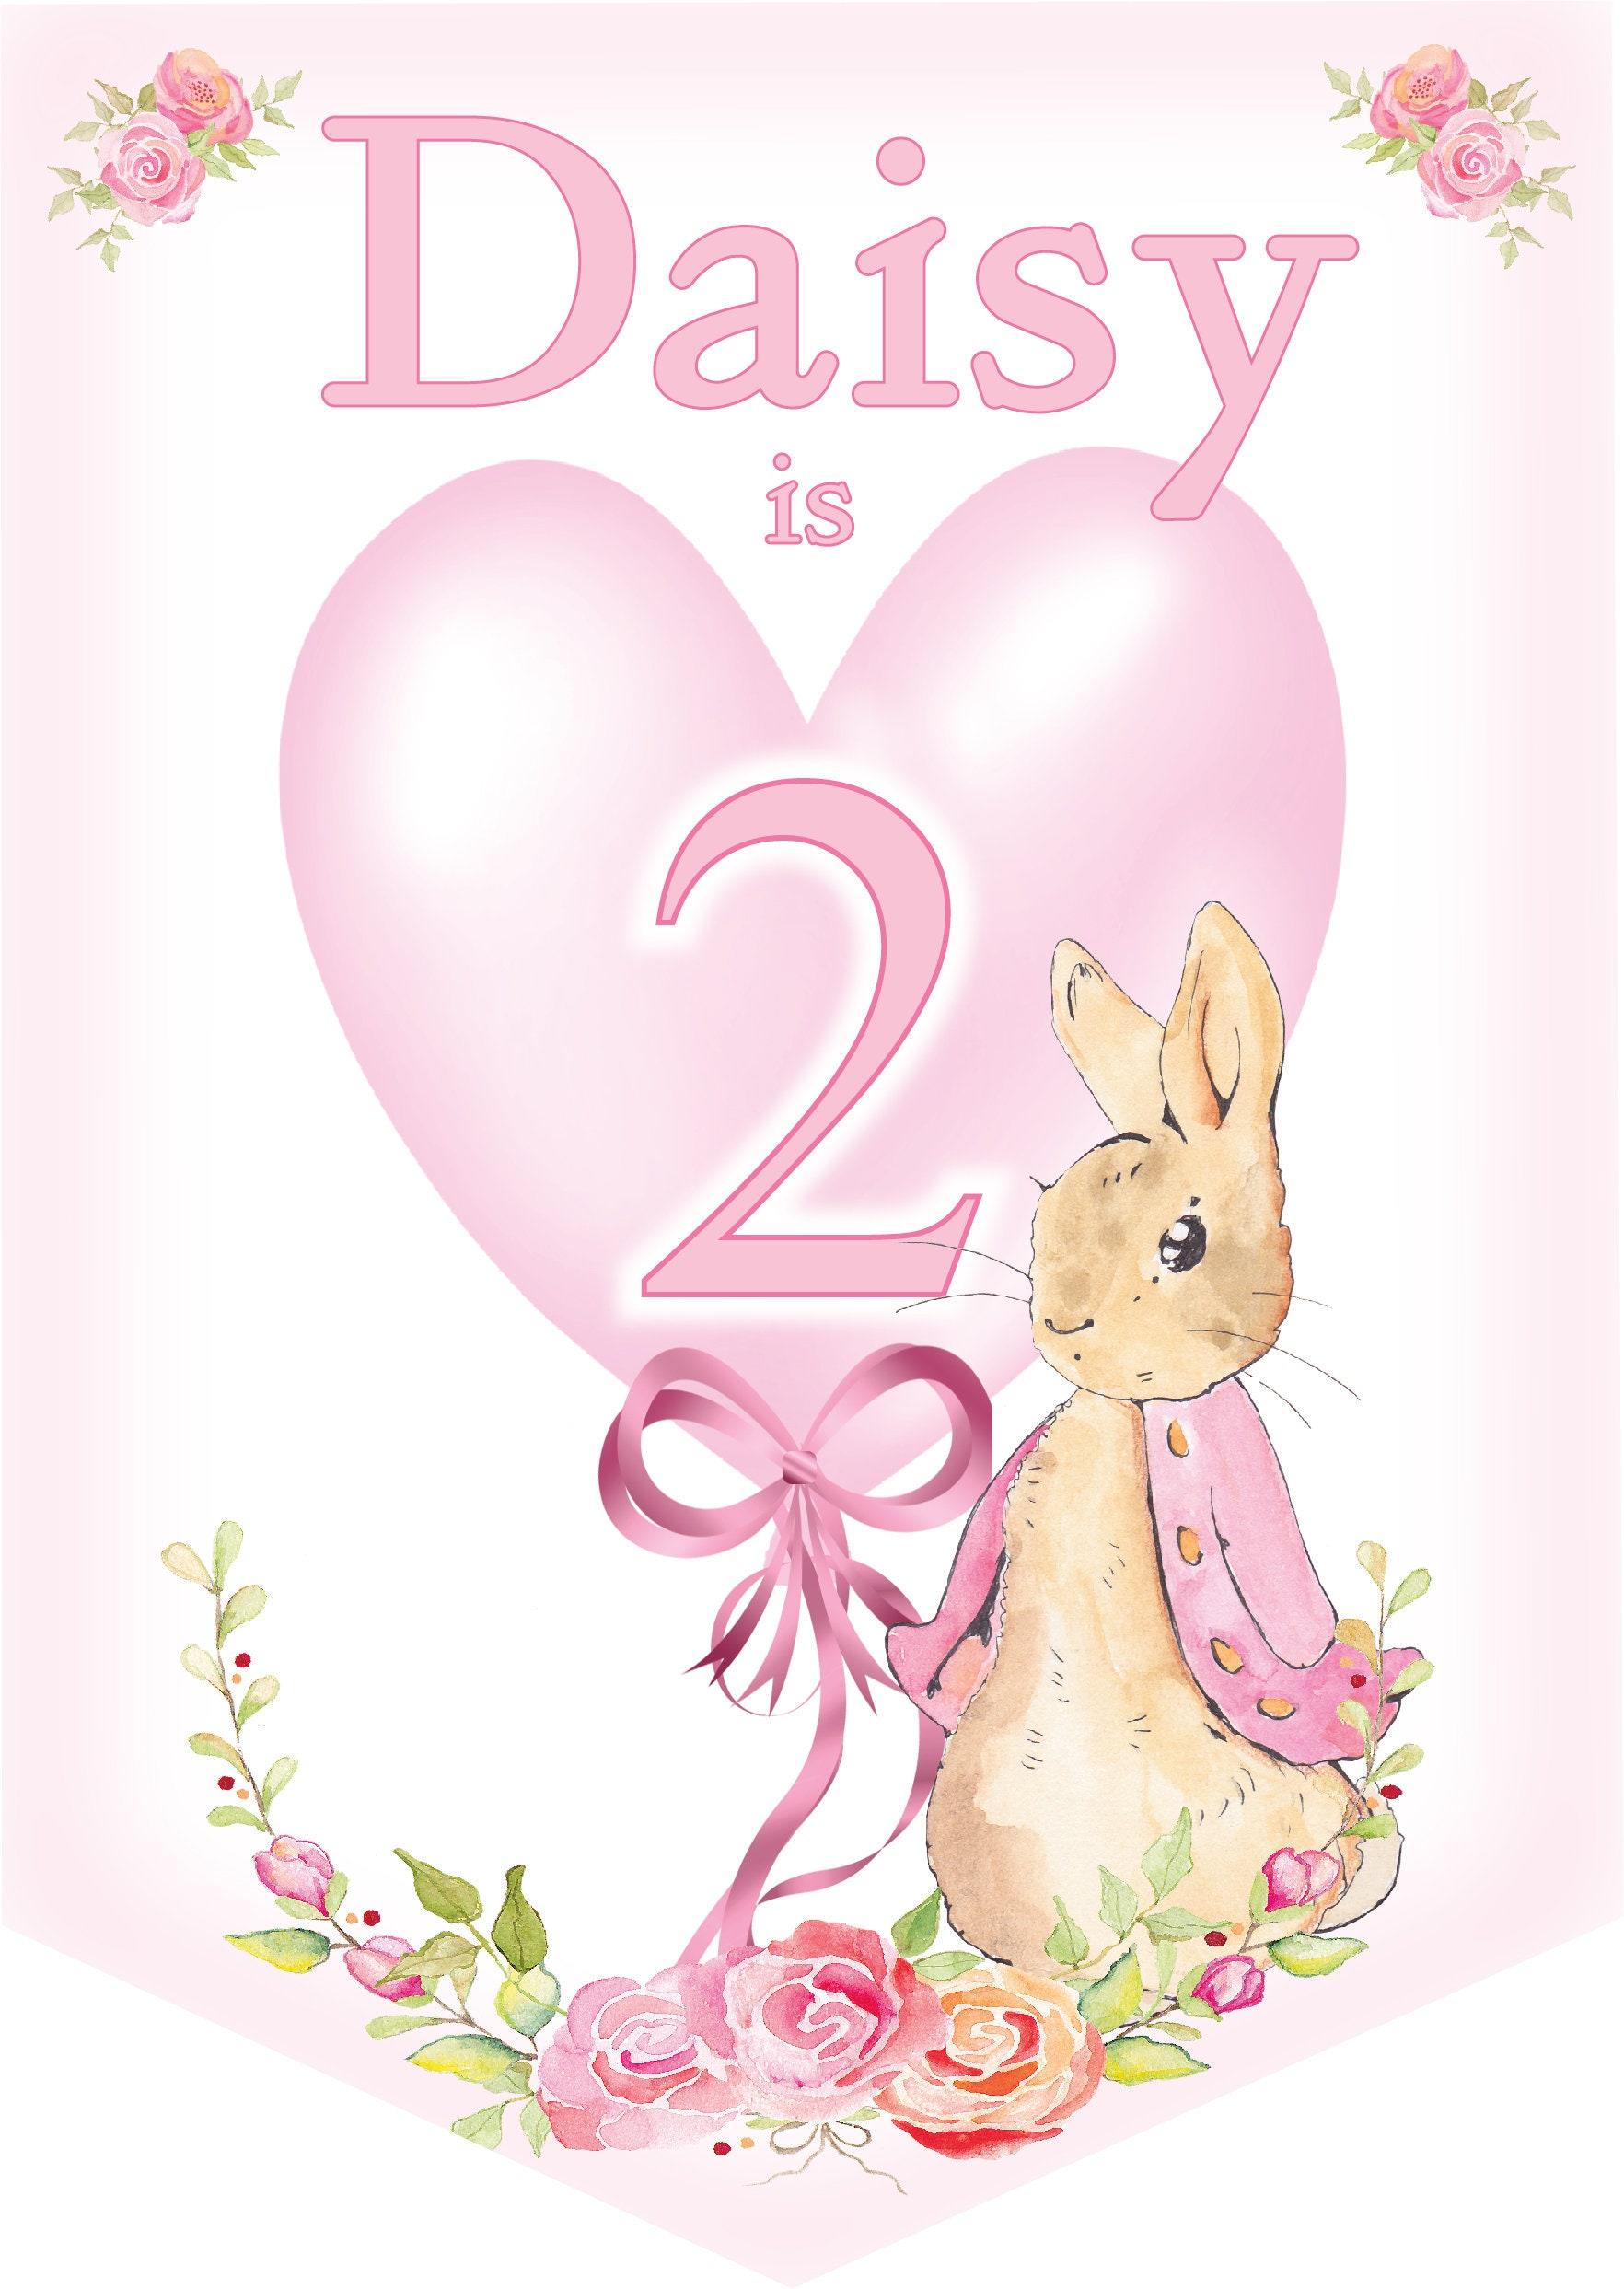 Flopsy Bunny Birthday Bunting,Pink Peter Rabbit Banner,Girls Birthday Party Bunting,Personalised,Any Age